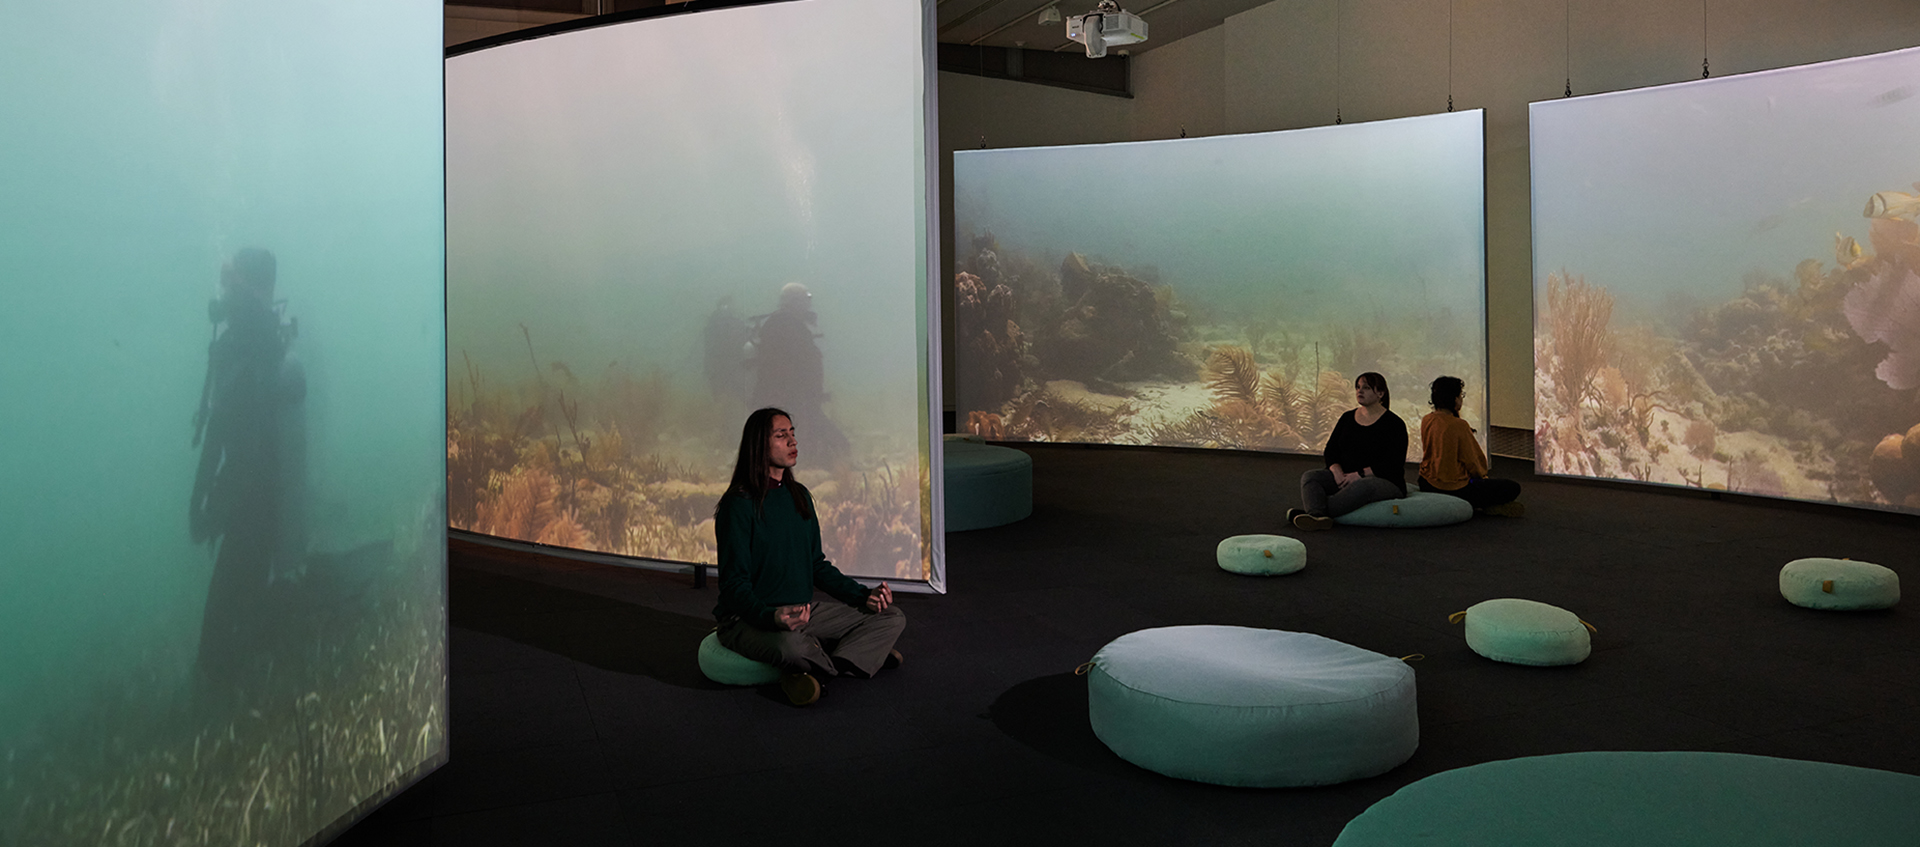 A dimly lit gallery space with four large screens projecting scuba divers meditating among coral reefs. Three visitors sit in meditation on round cushions on the floor.